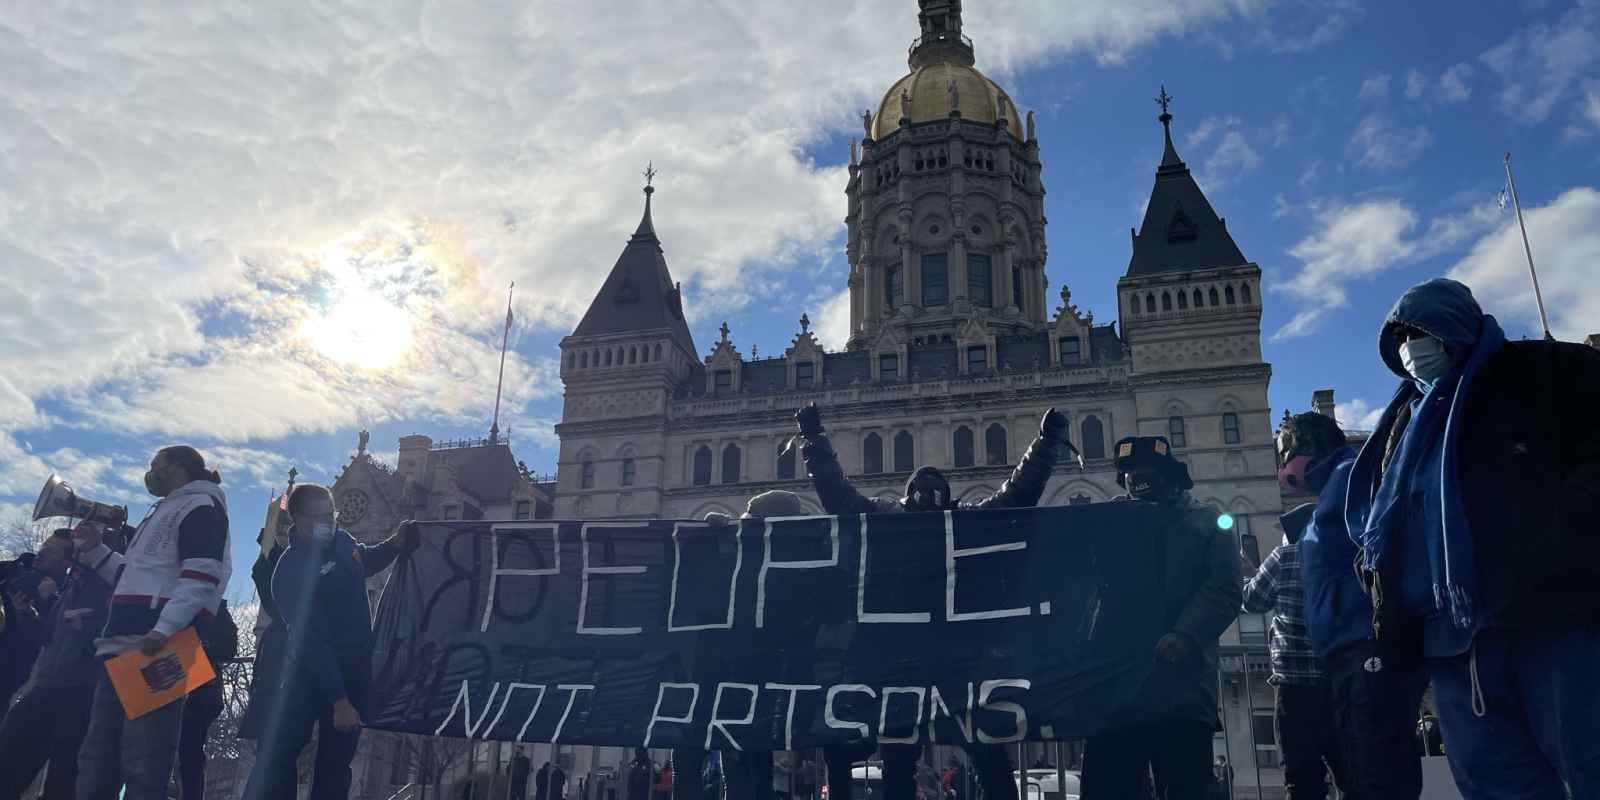 Smart Justice leaders stand in front of the CT capitol. The sun is breaking through a cloud. One person stands with arms upstretched above their head, behind the people not prisons banner